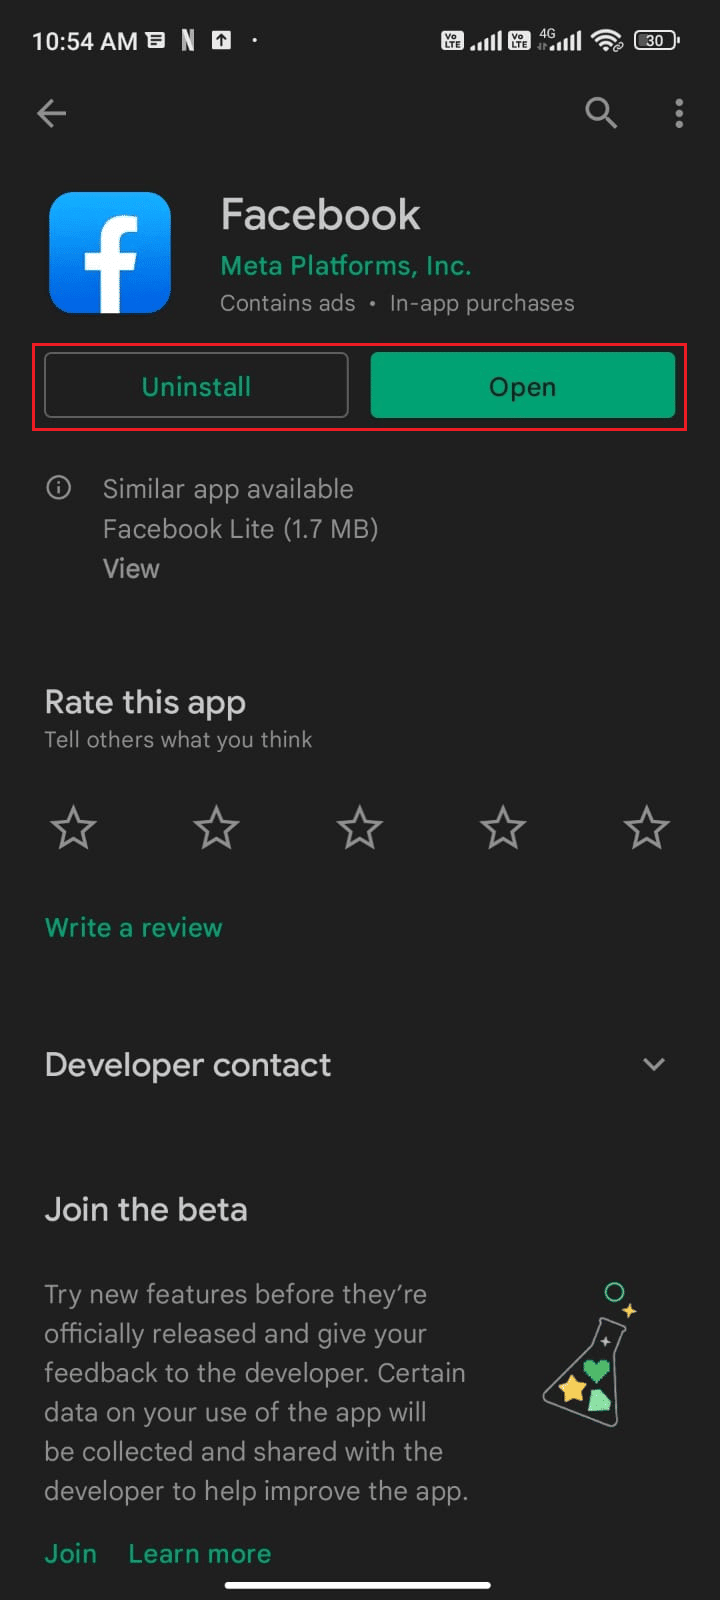 If your app is already updated, you will see only the Open and Uninstall options